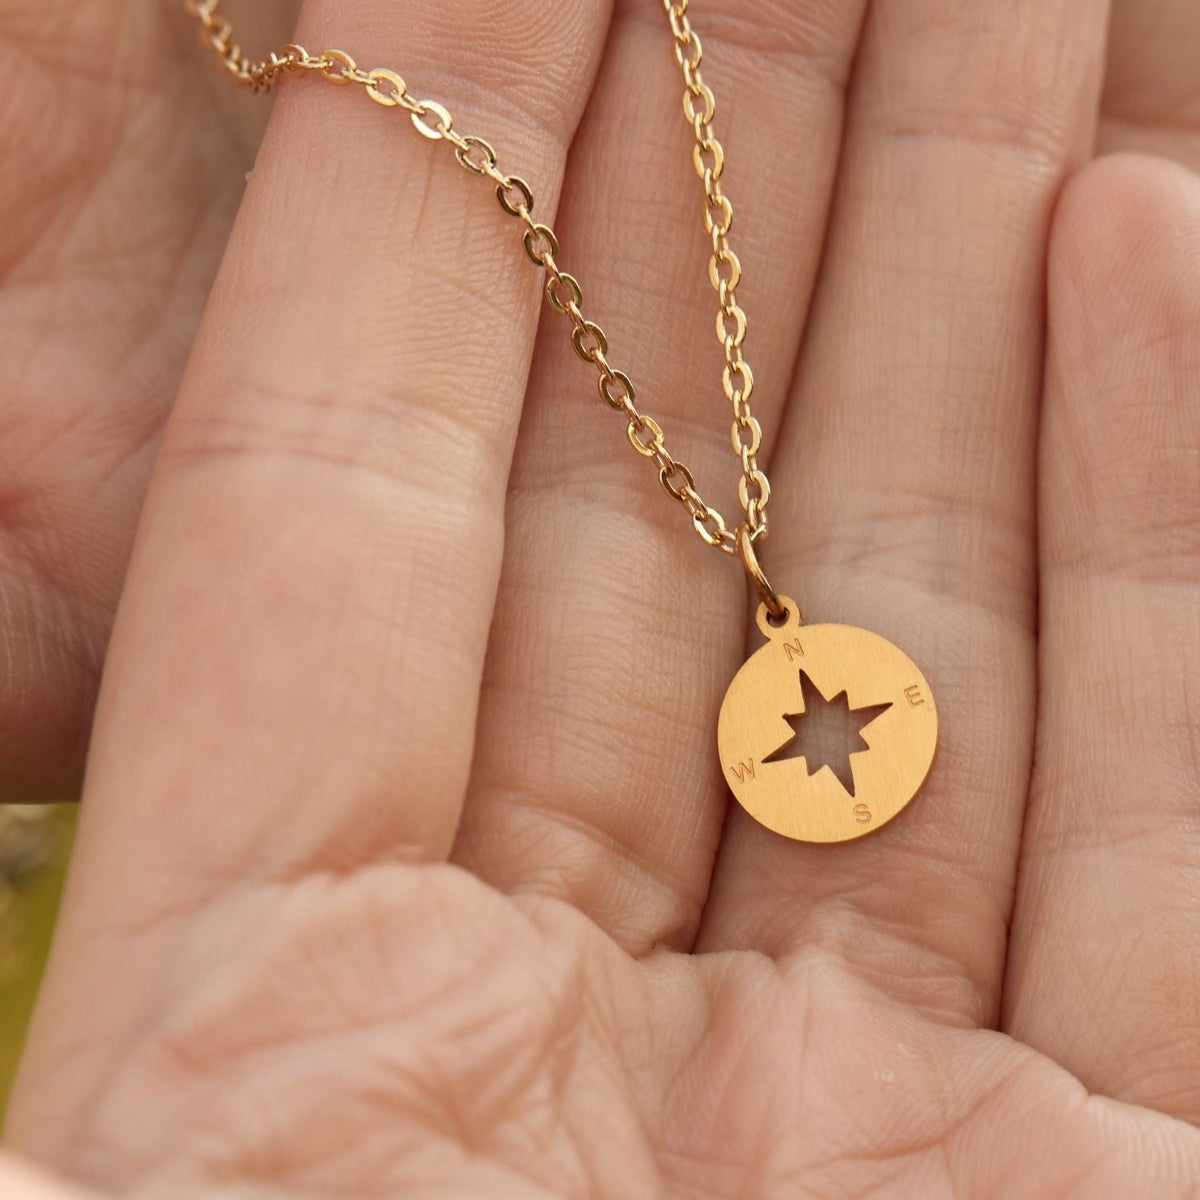 To My Bonus Daughter | God&#39;s Power in Your Life | Compass Necklace